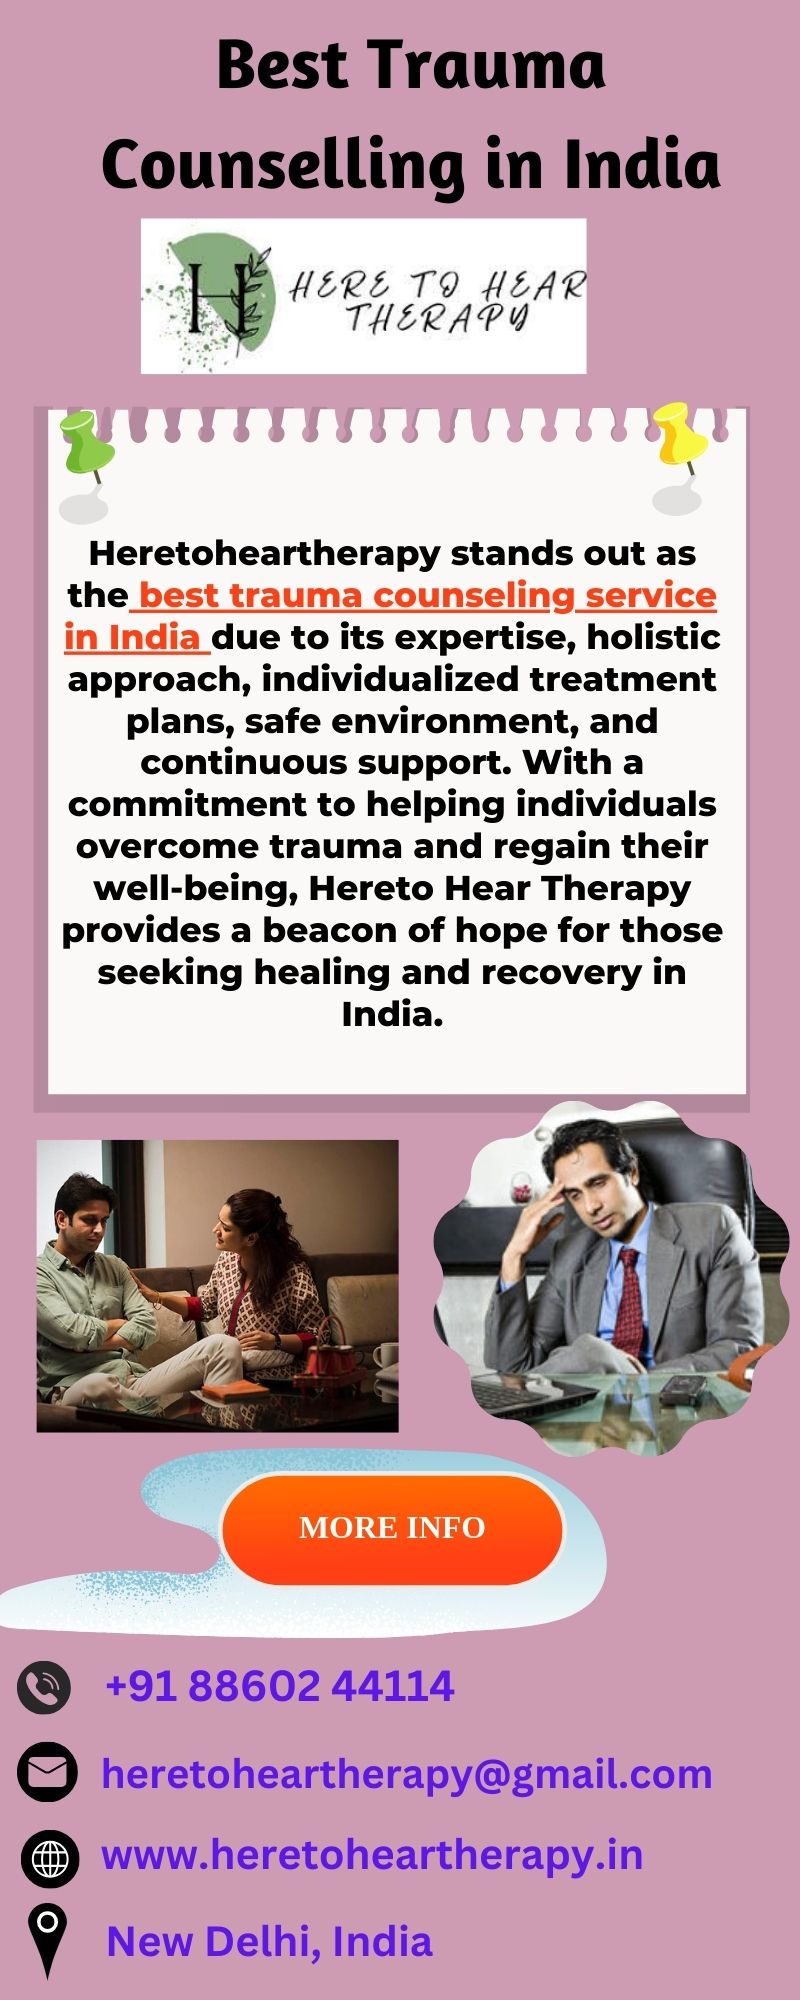 Best Trauma Counselling in India